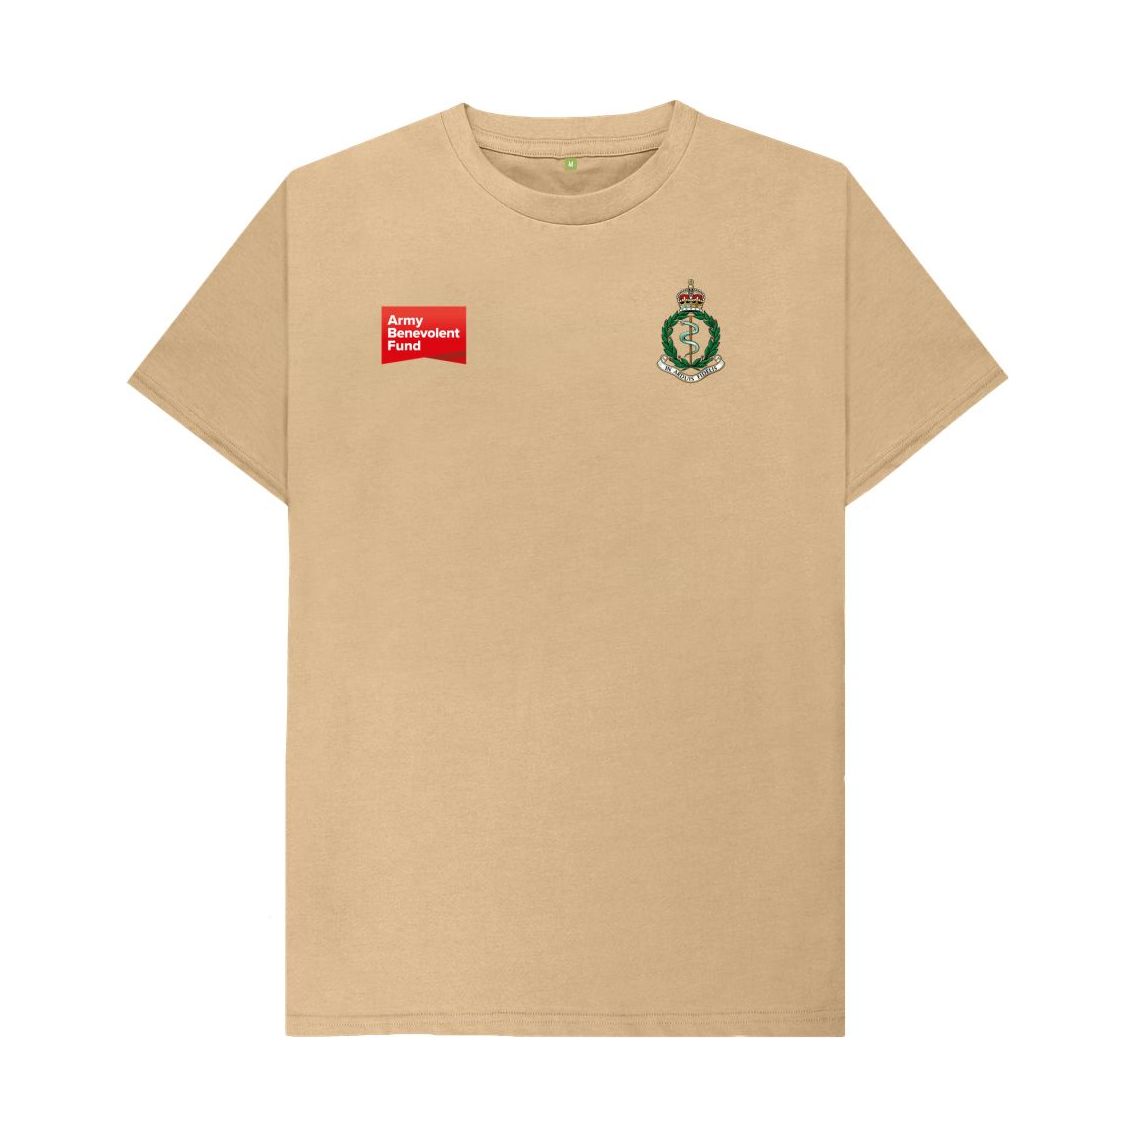 Royal Army Medical Corps Unisex T-shirt - Army Benevolent Fund